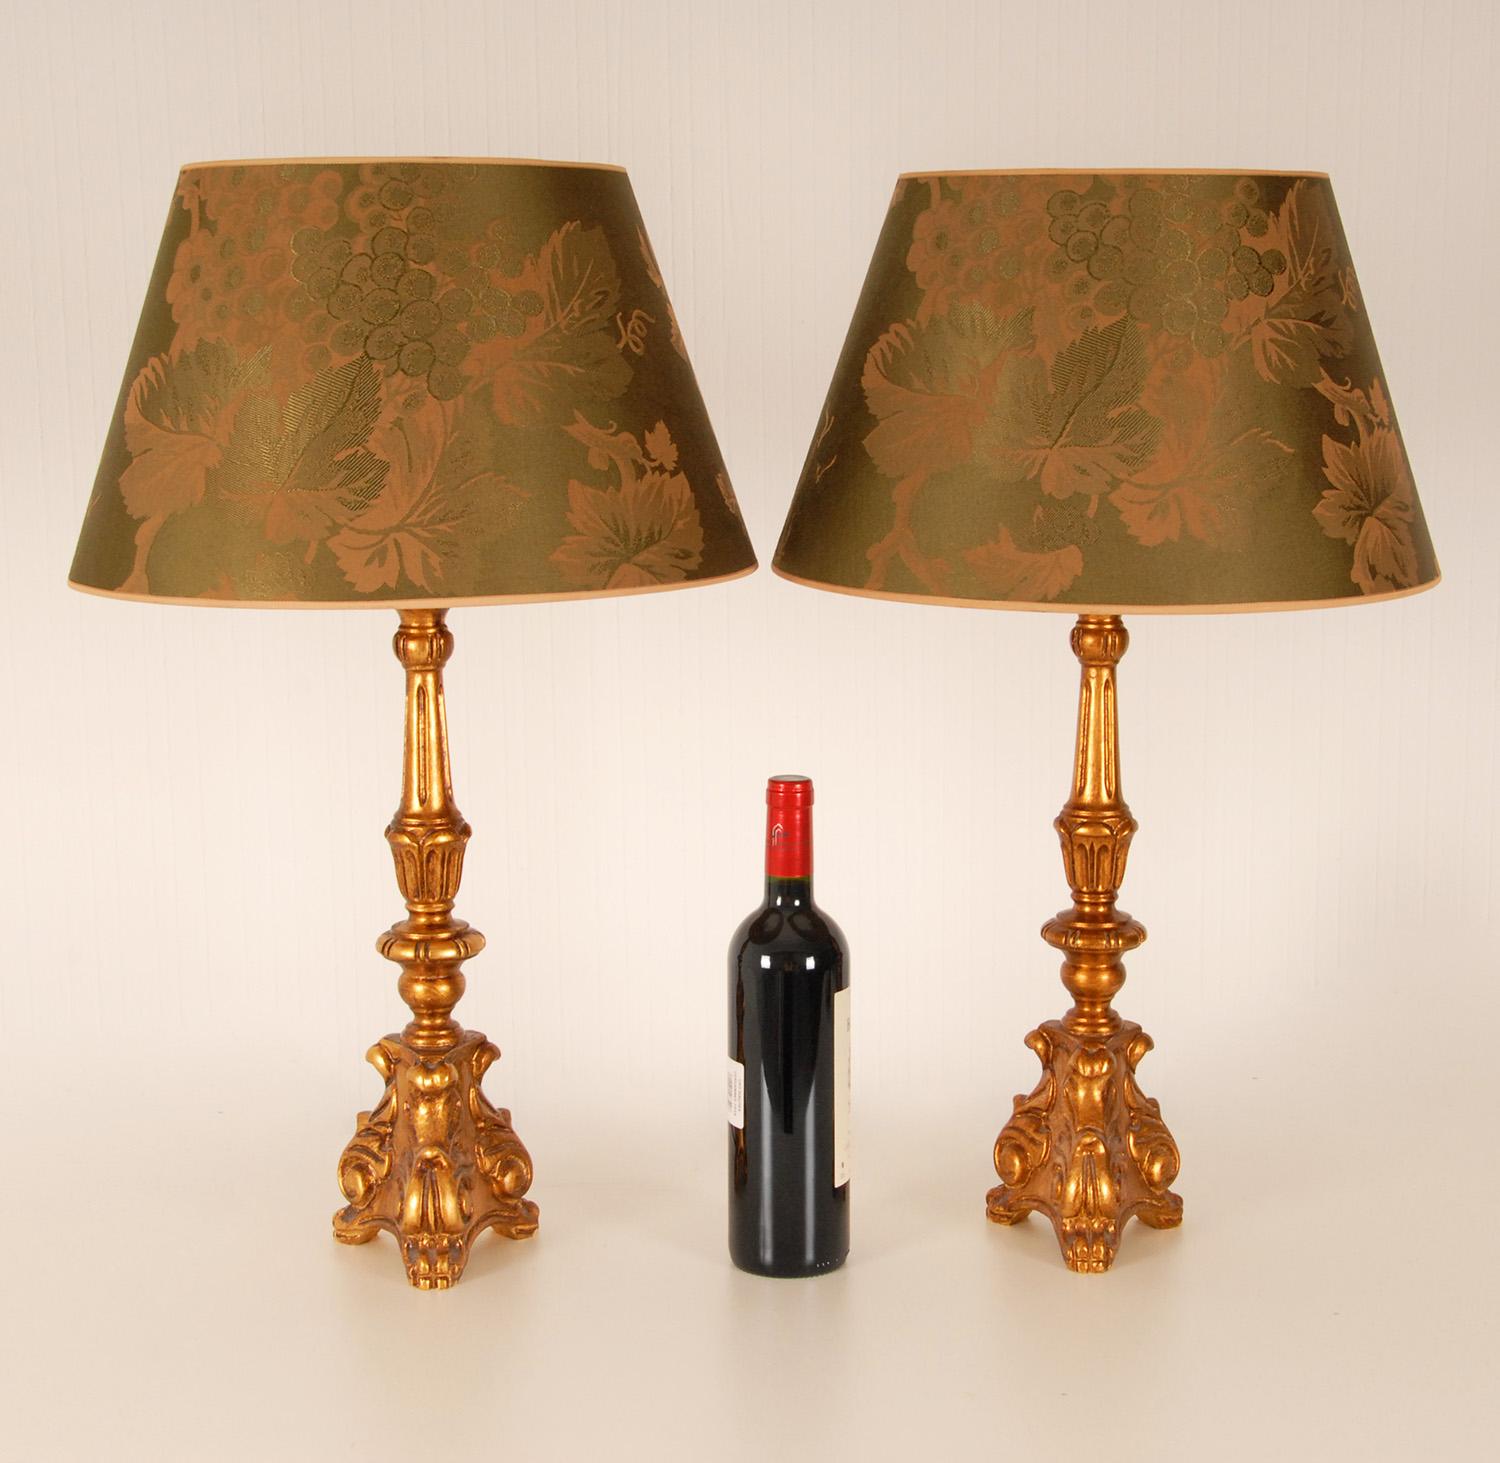 Vintage French Country Style Gold Giltwood Green Baroque Table Lamps, a Pair In Good Condition For Sale In Wommelgem, VAN